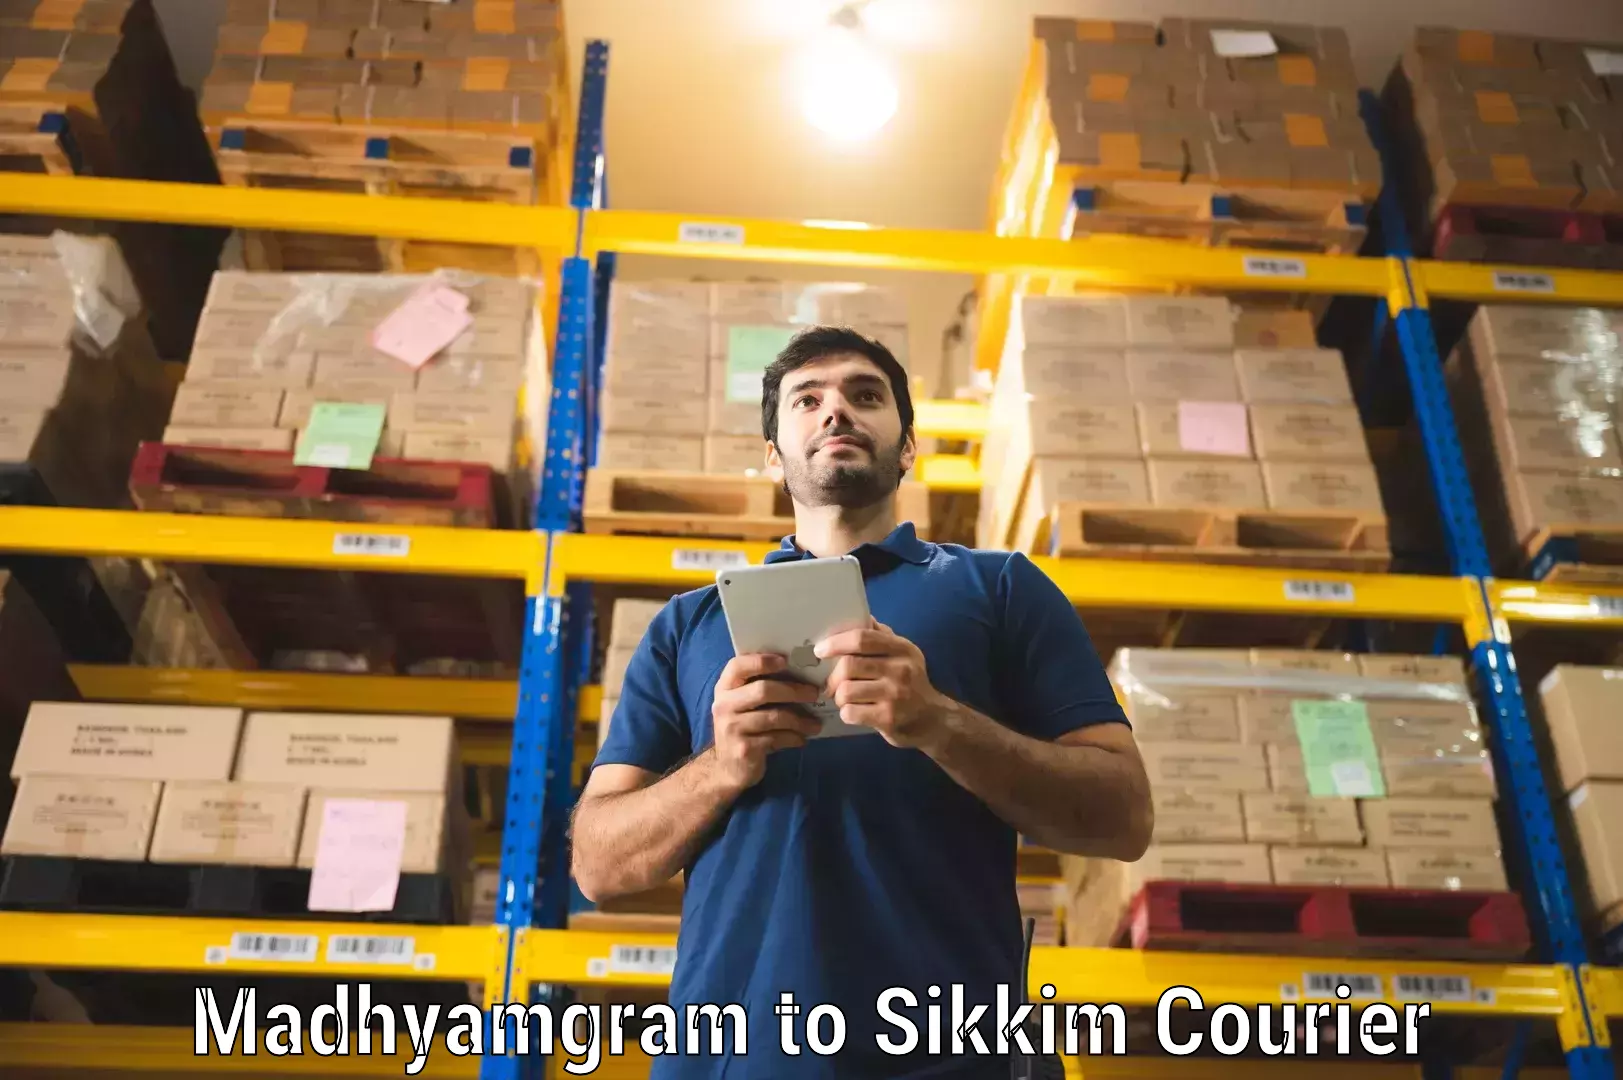 24-hour courier service in Madhyamgram to Sikkim